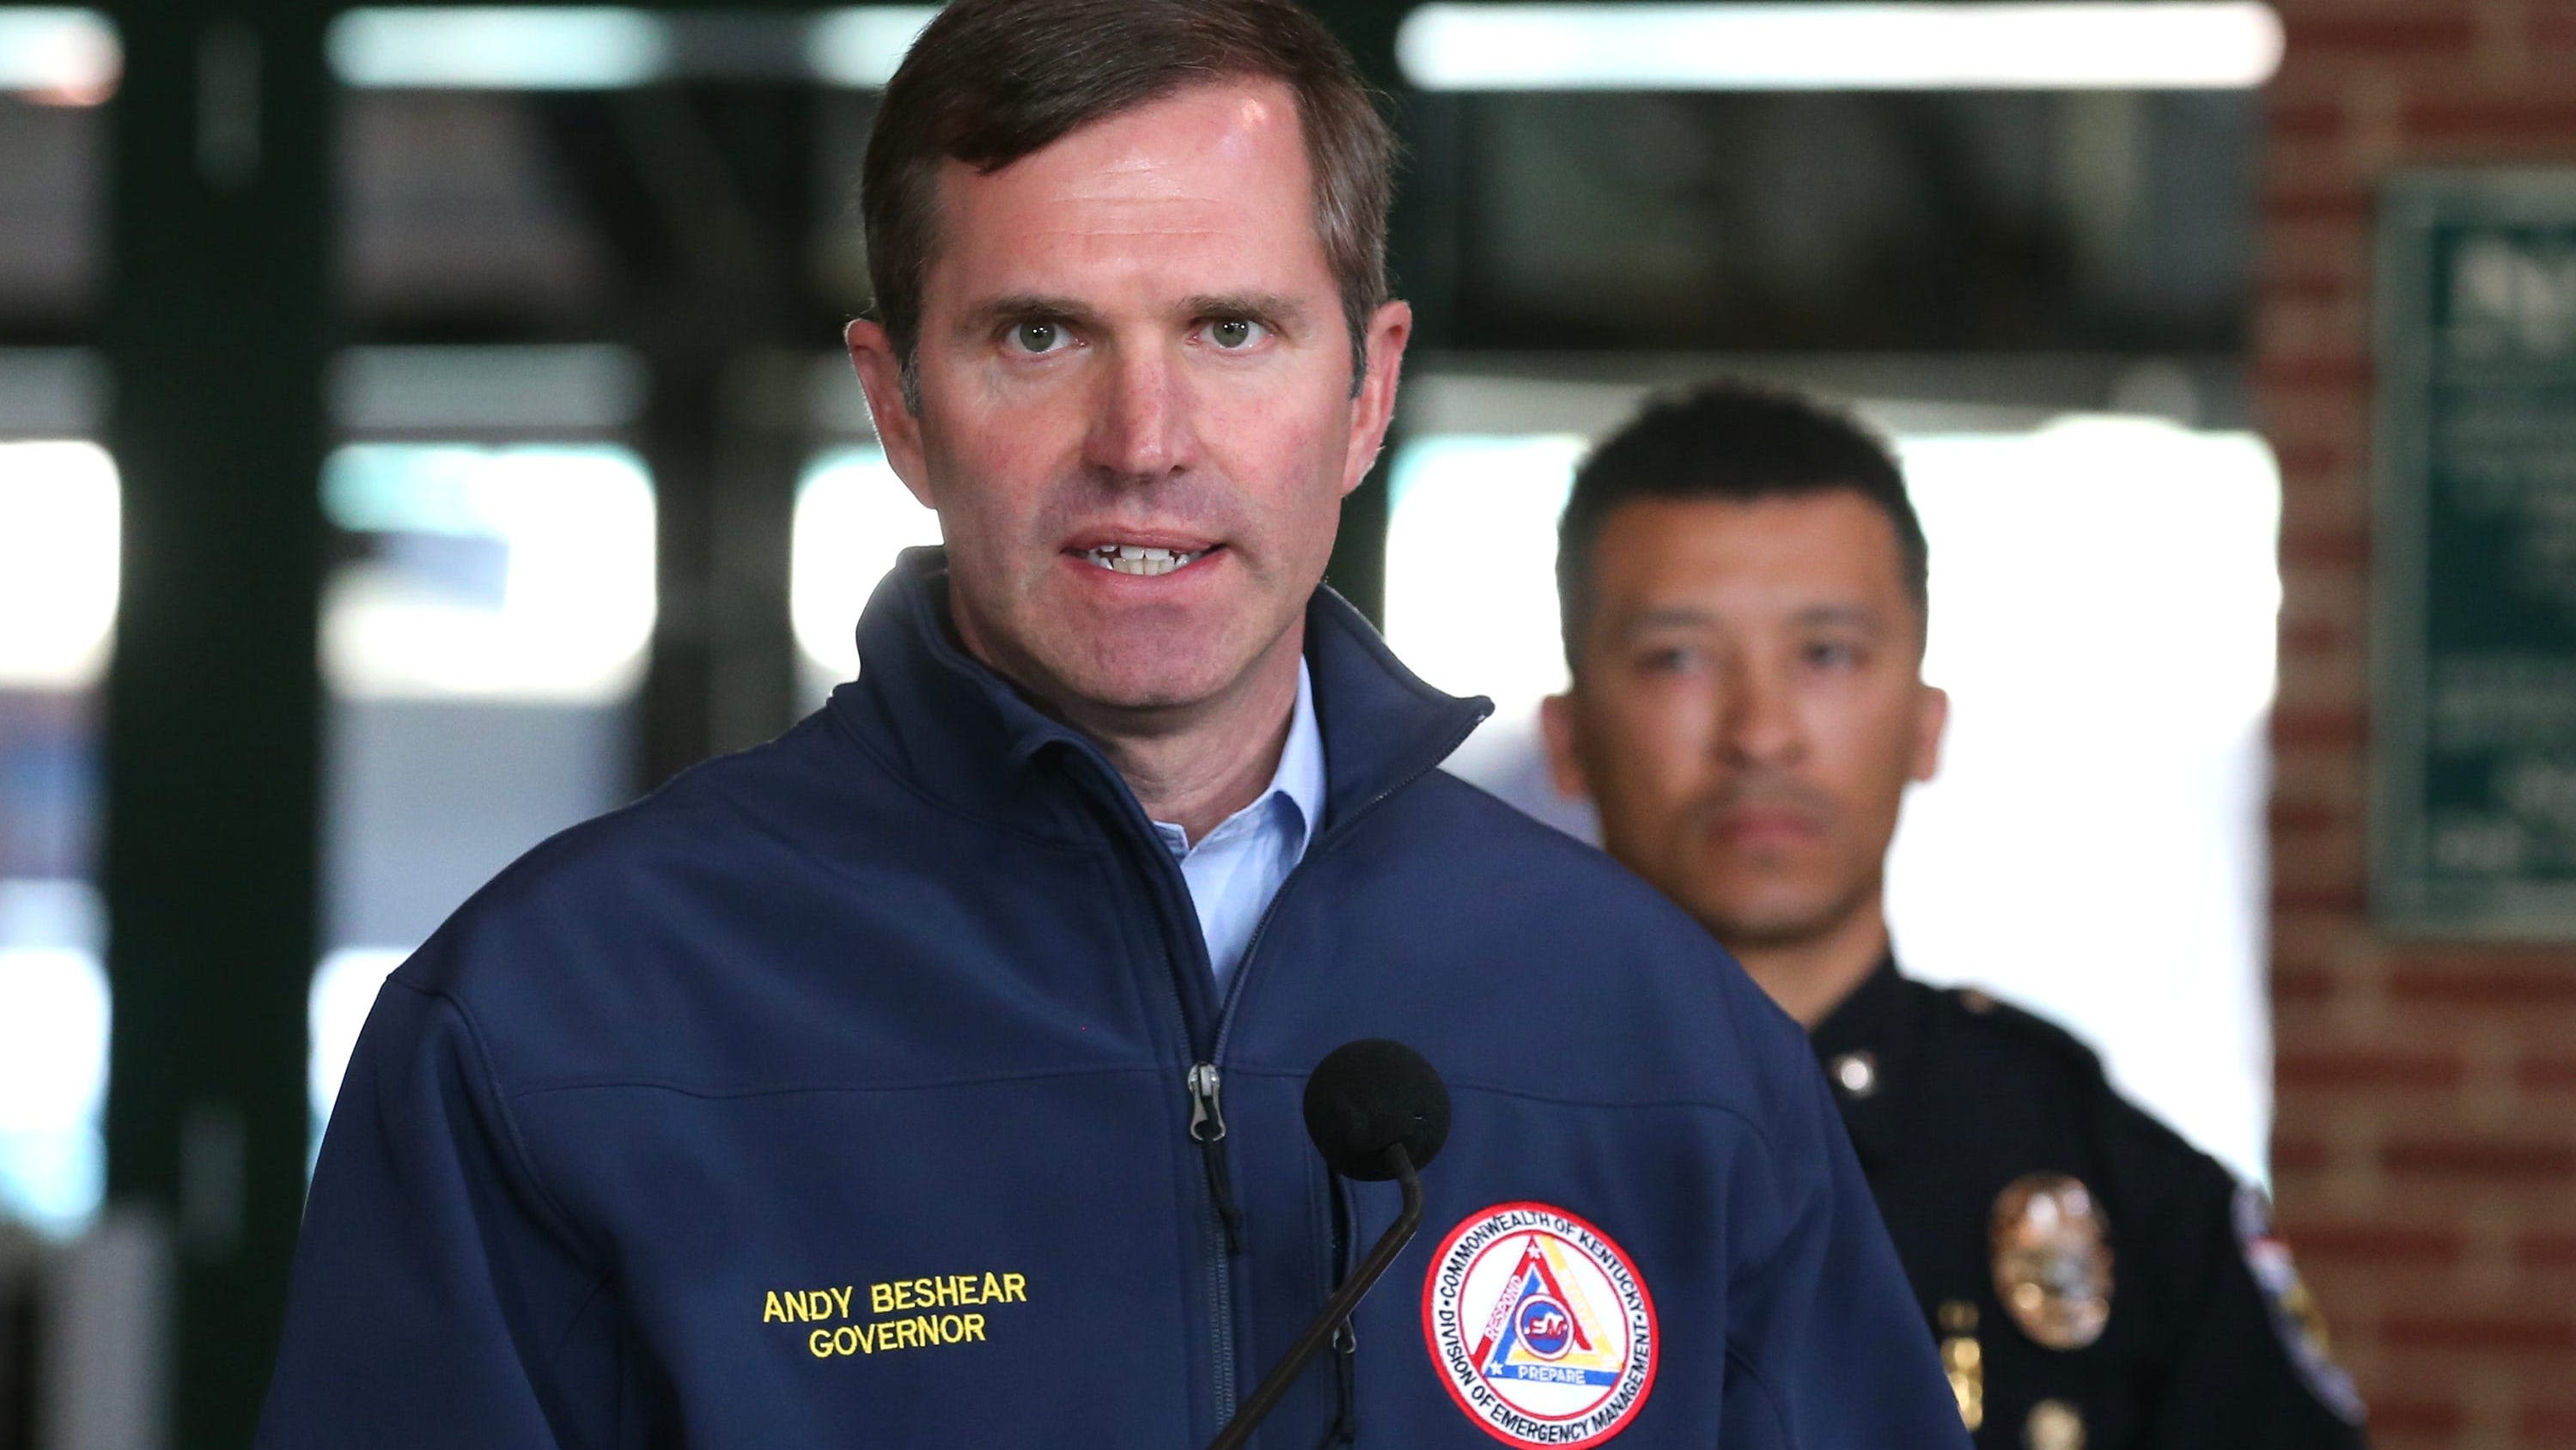 Andy Beshear, one of Kamala Harris' potential VP picks, makes campaign stop in pivotal swing state